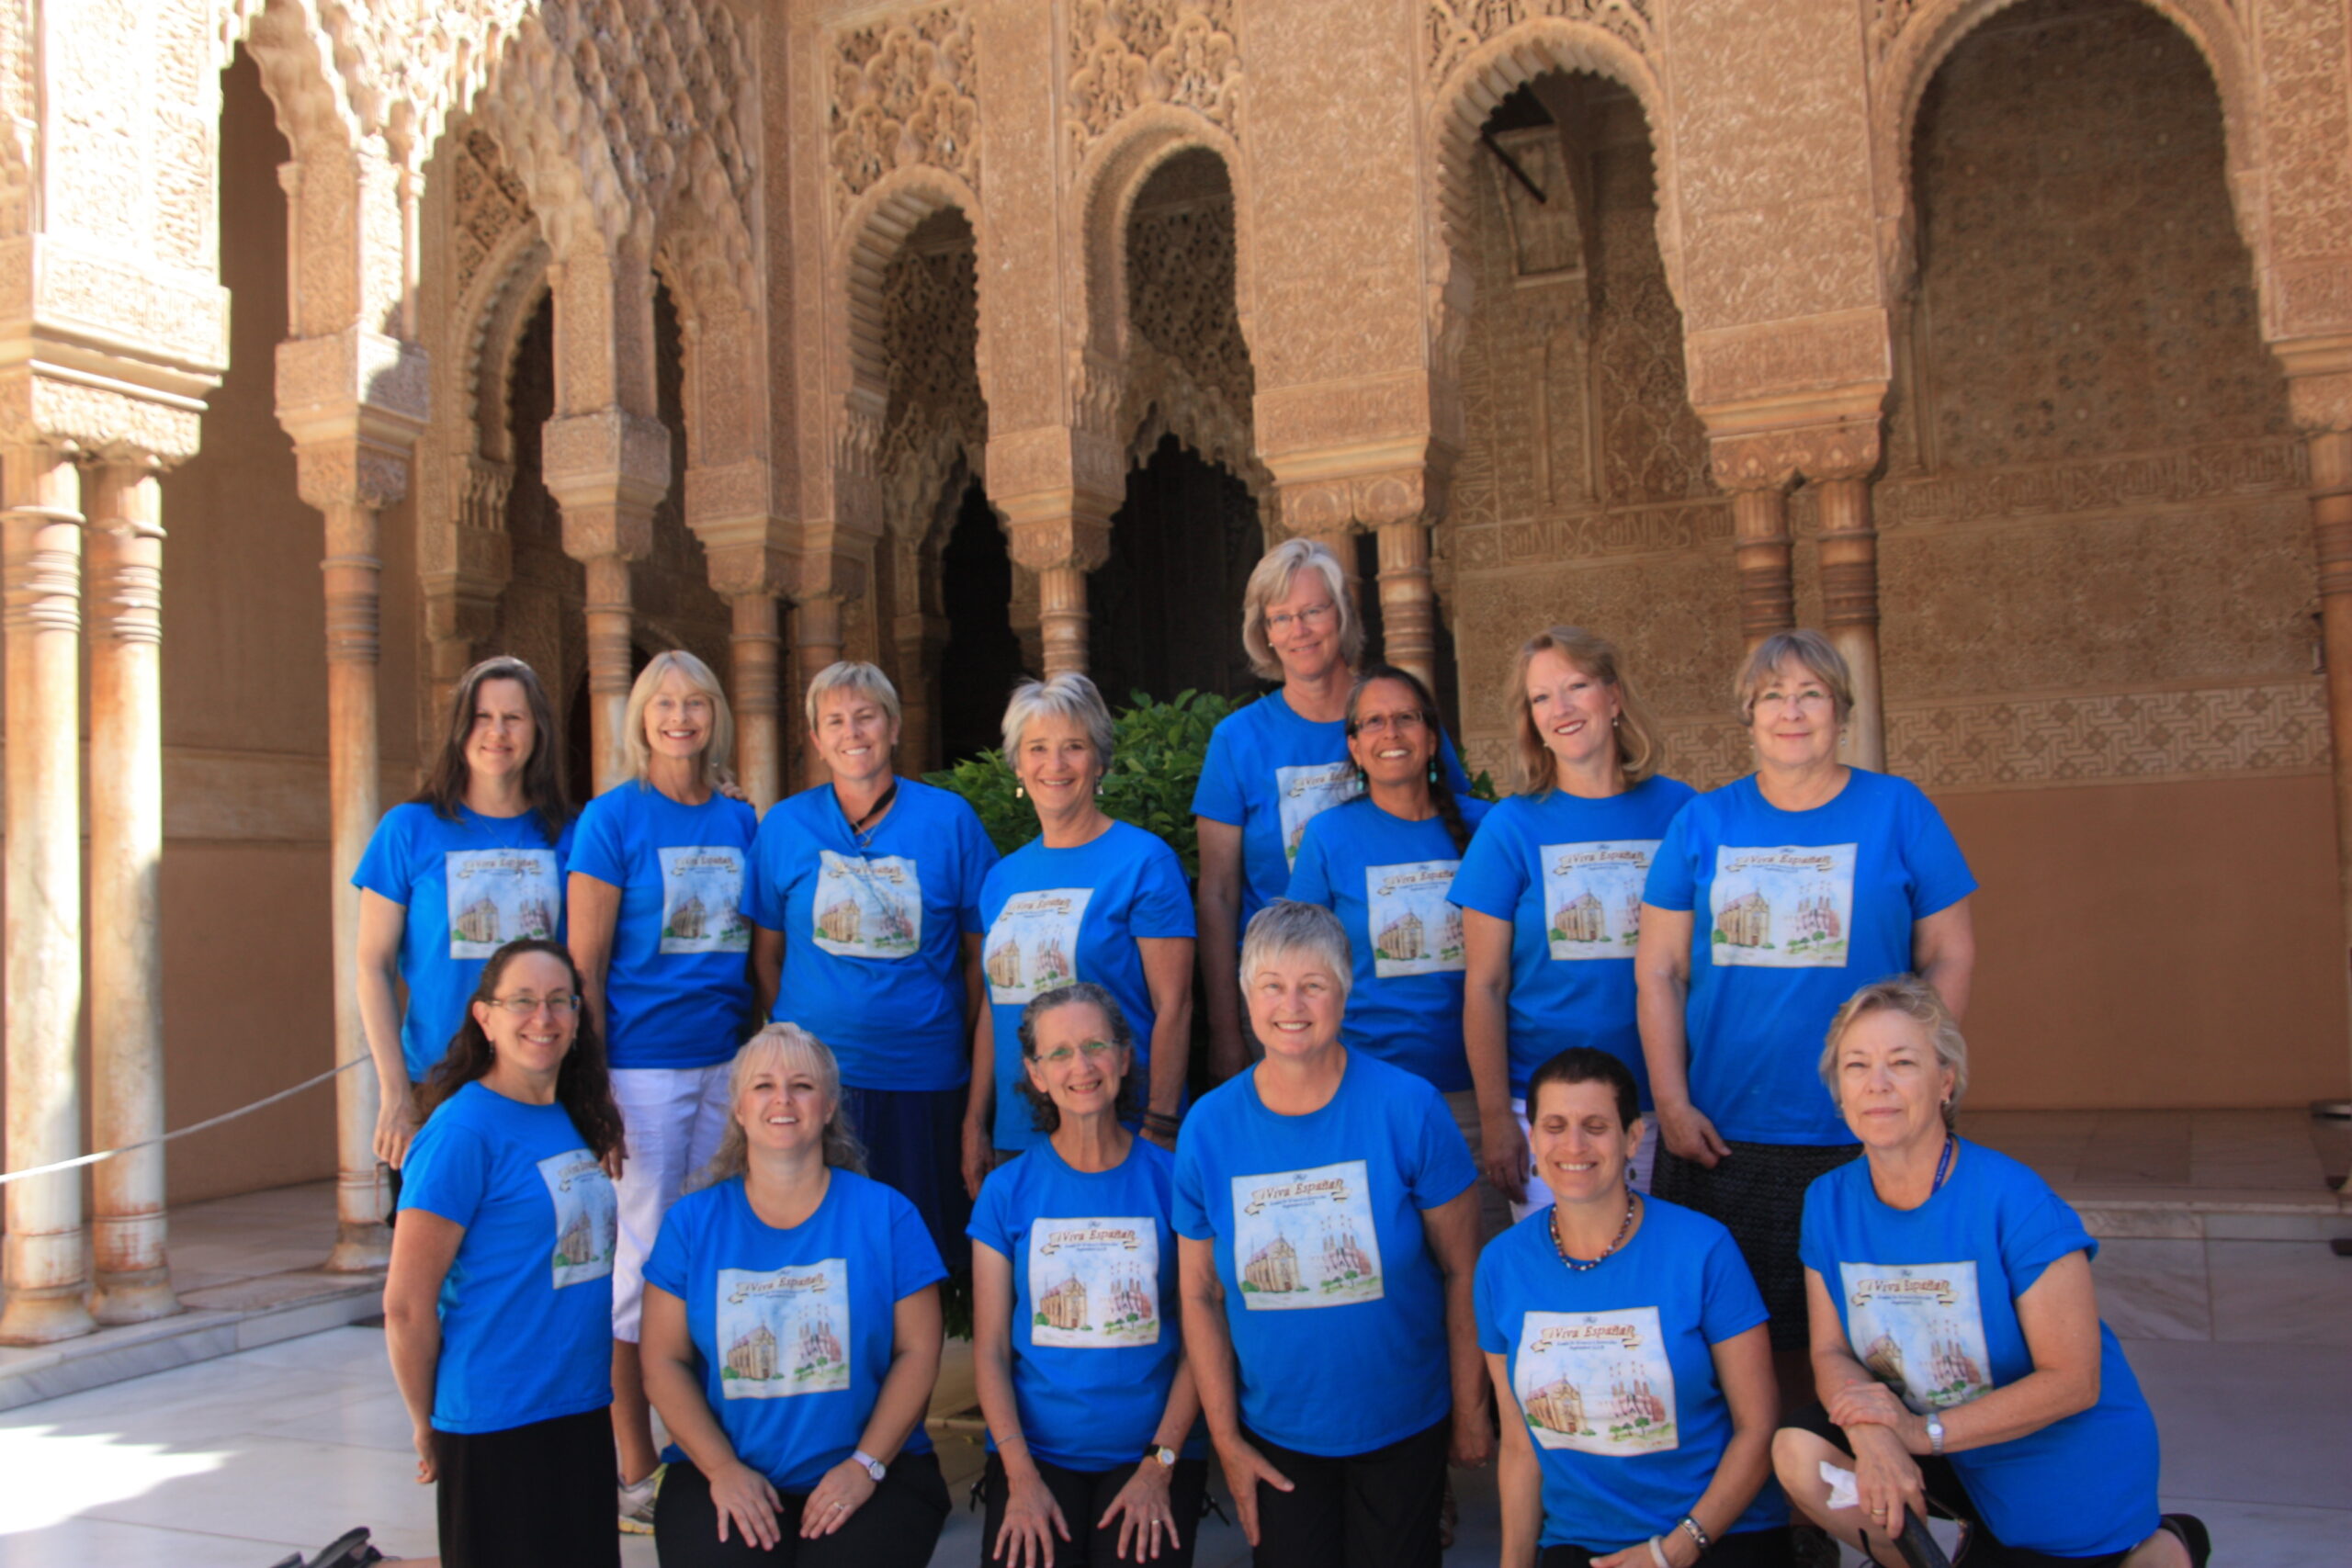 Smiling group of singers, wearing bright blue t-shirts, in Alhambra Spain, 2013